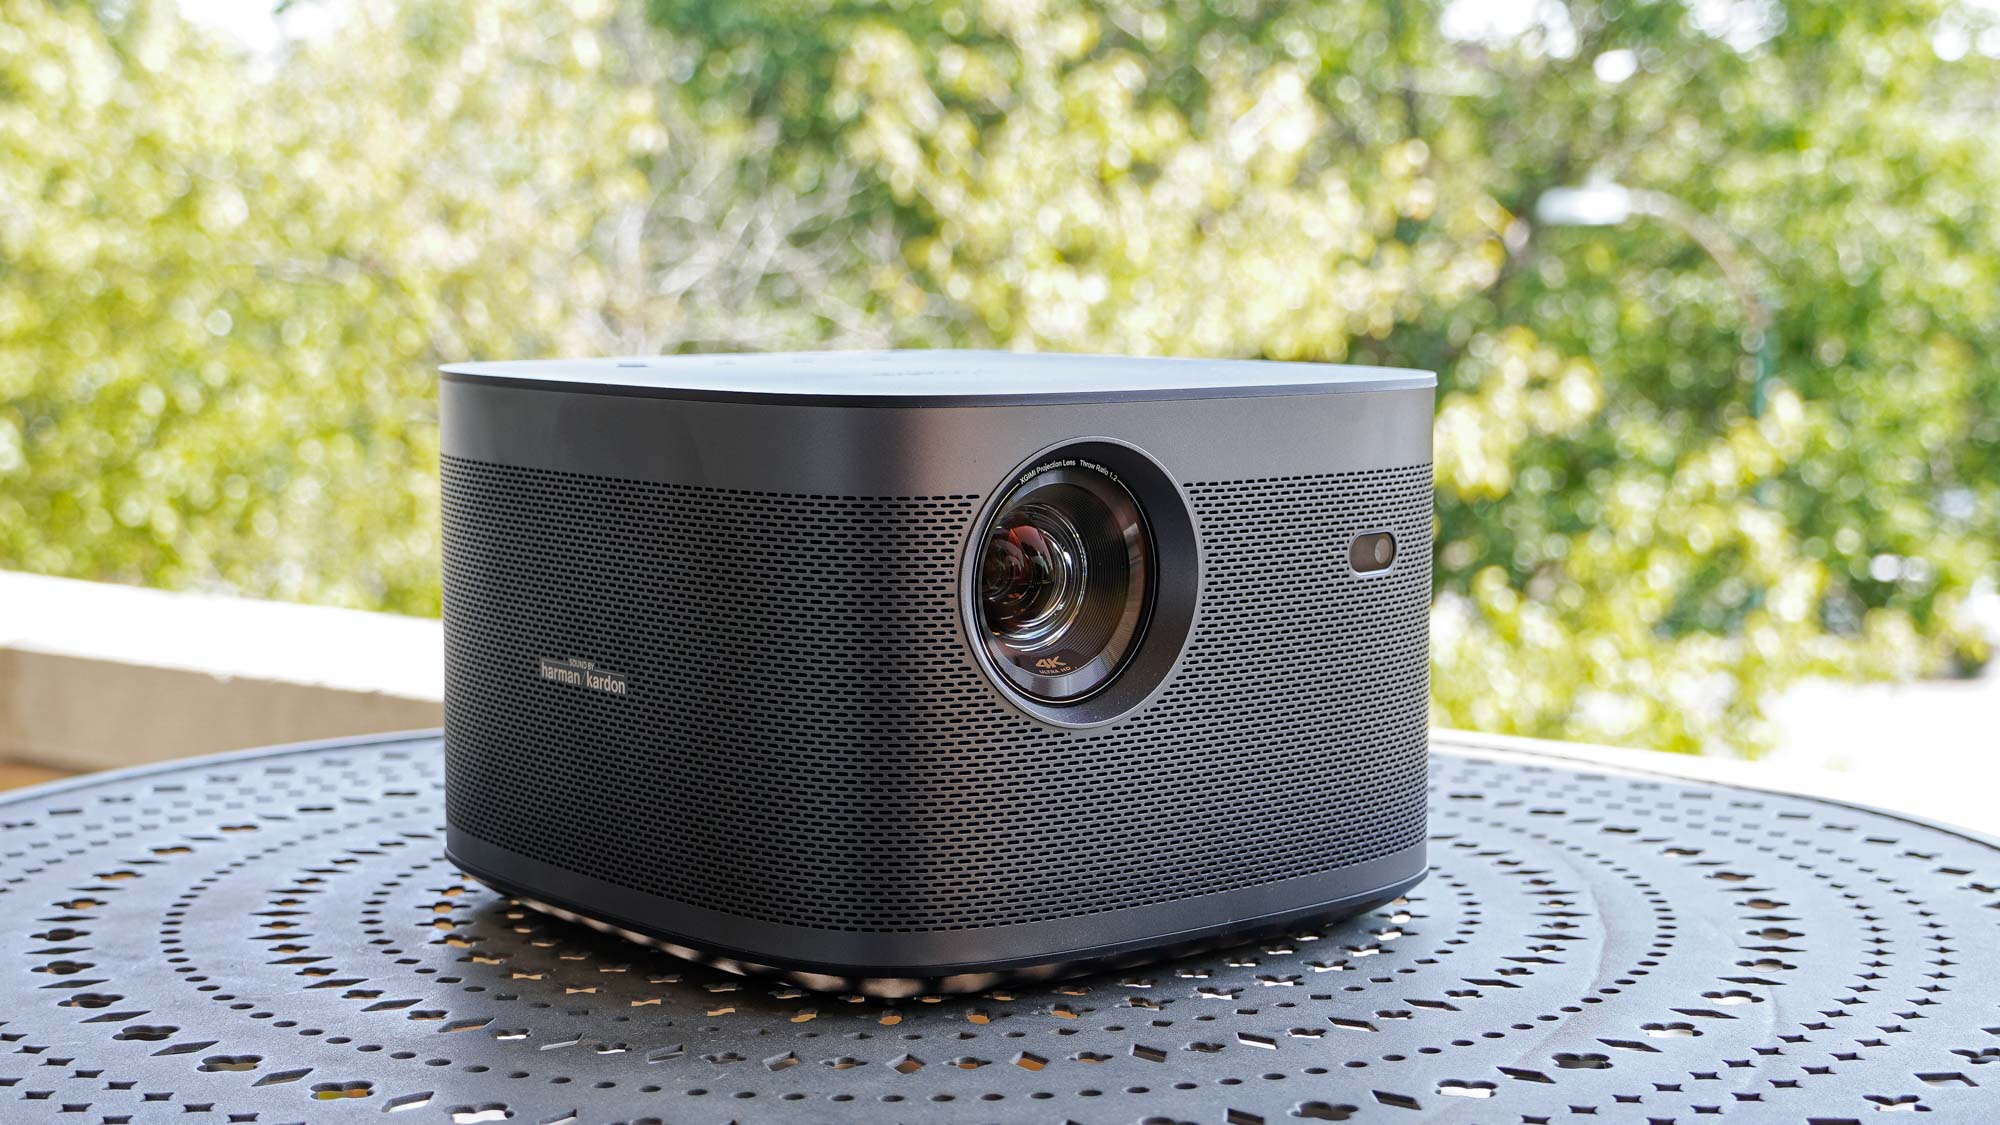 XGIMI Horizon Pro Review - Compact 4K Projector on a Budget